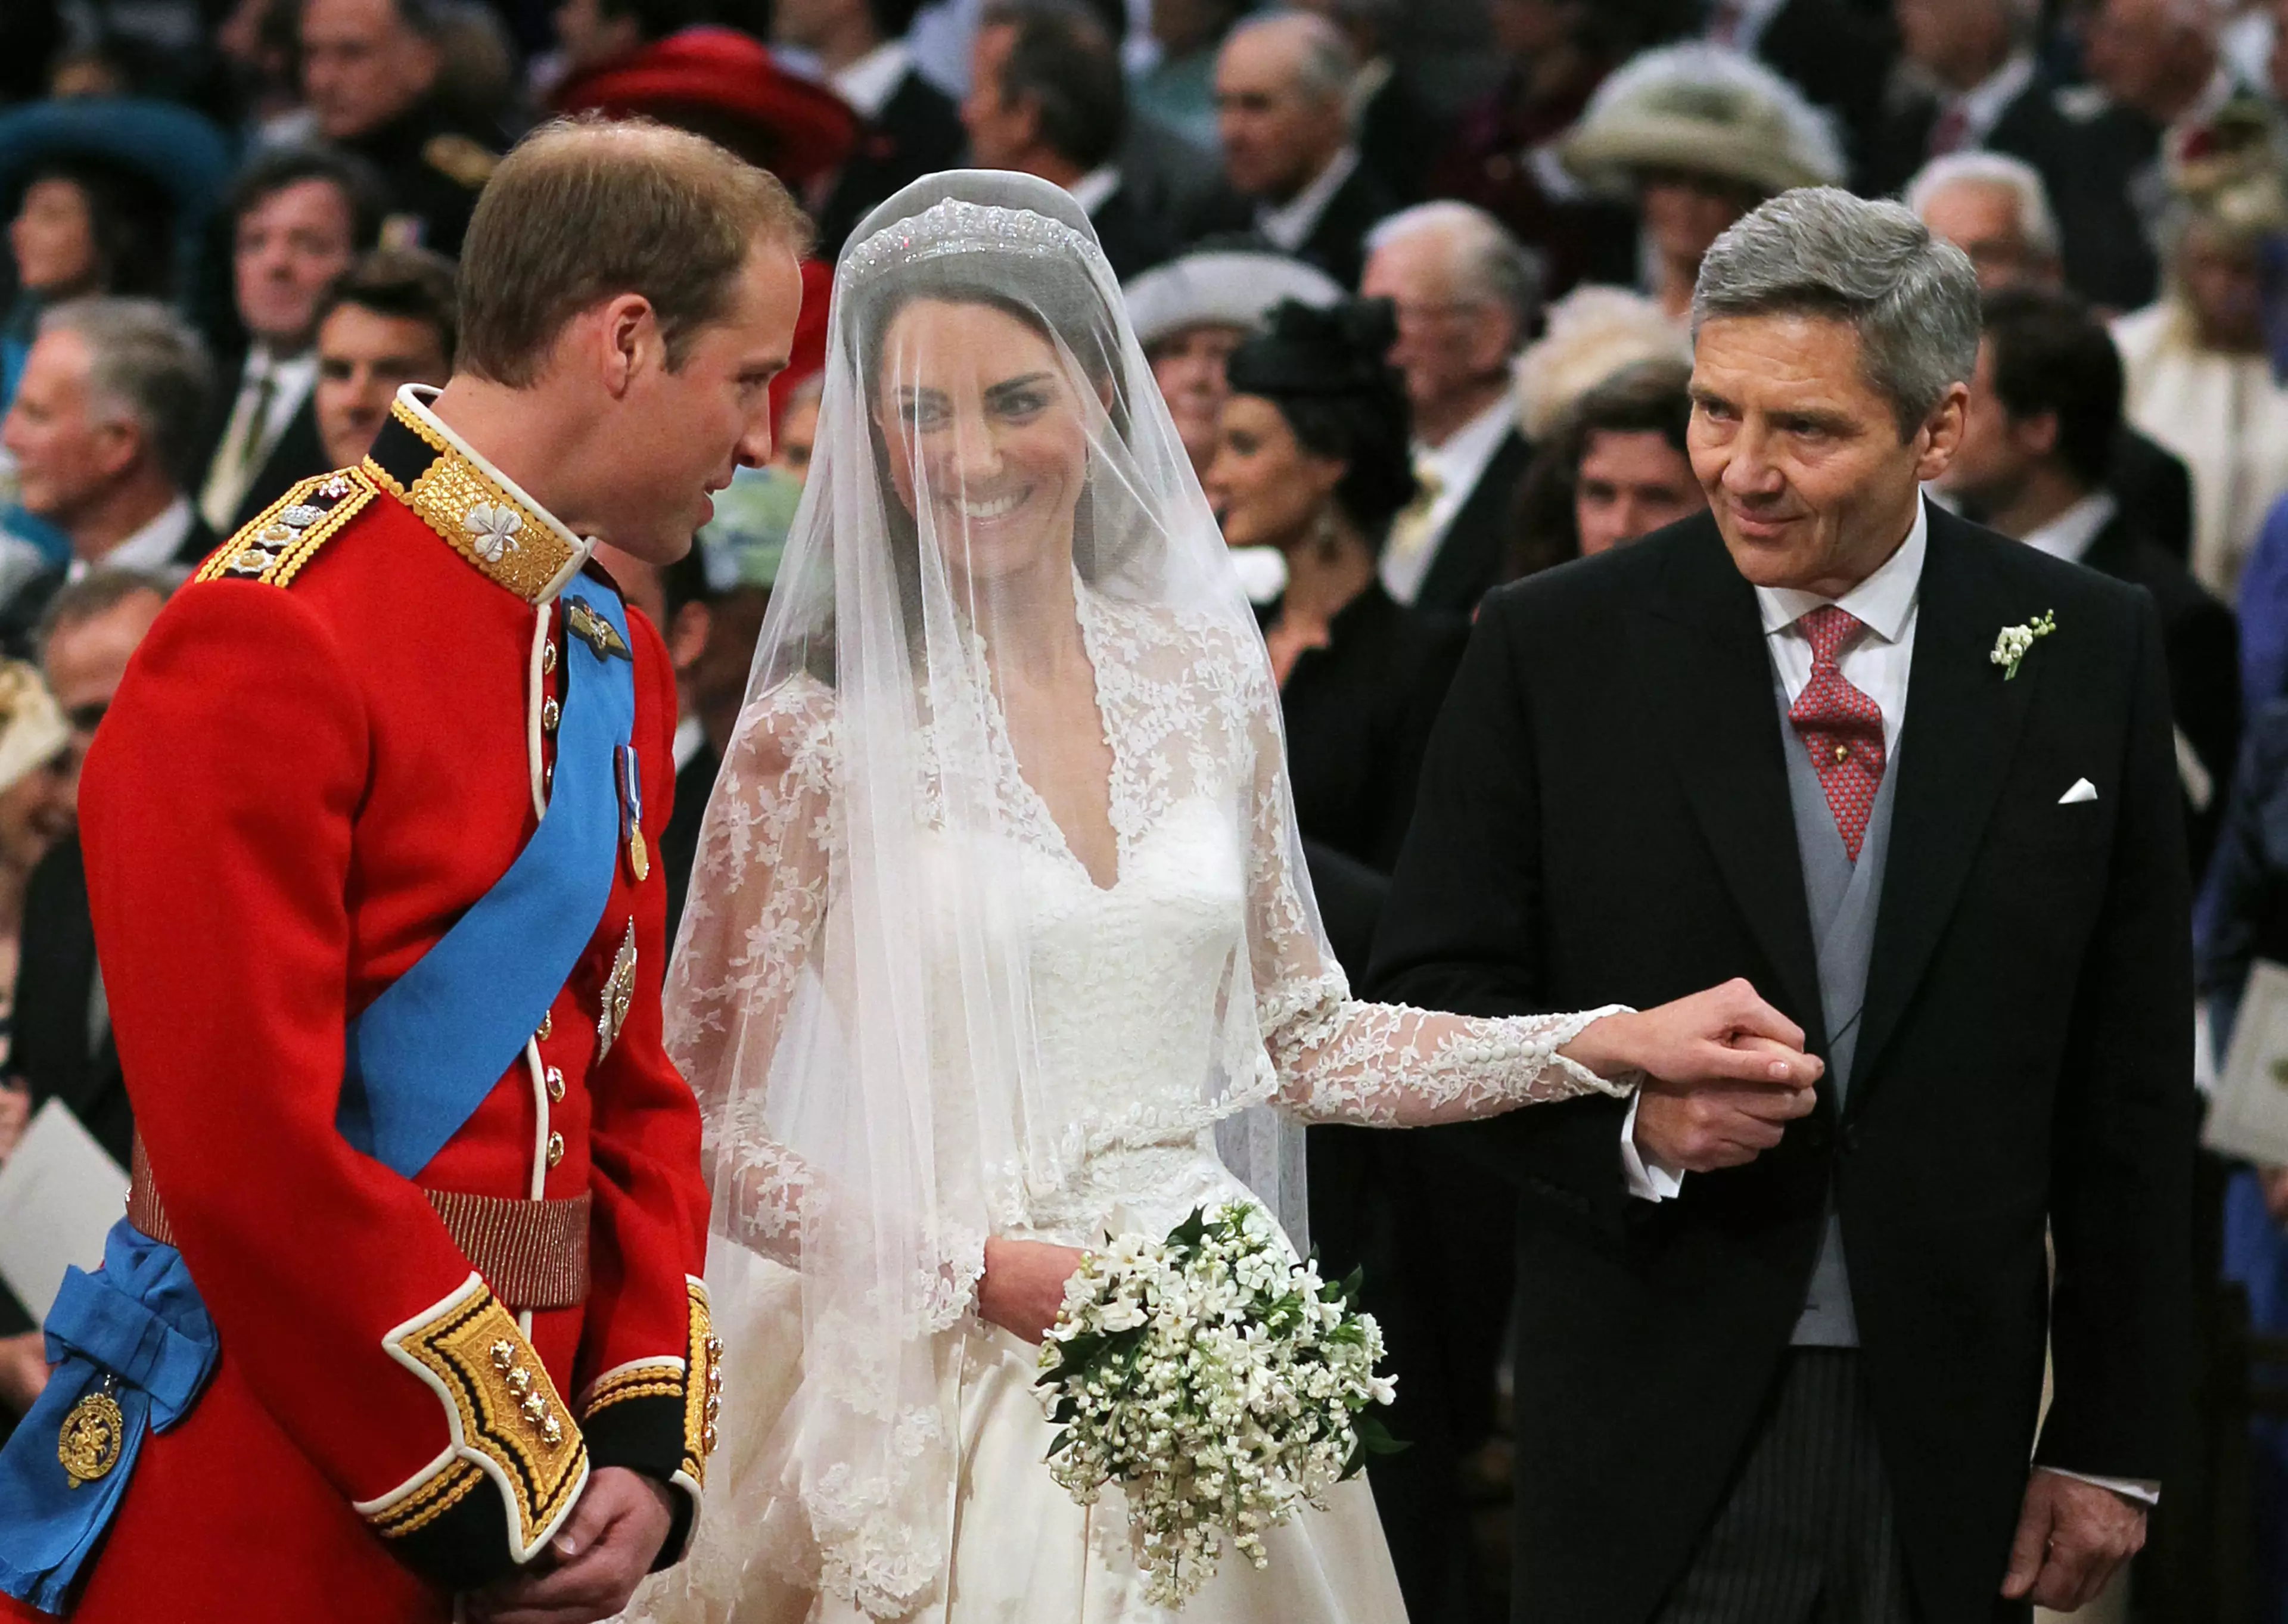 Kate and Will were married on 29th April 2011 at Westminster Abbey (